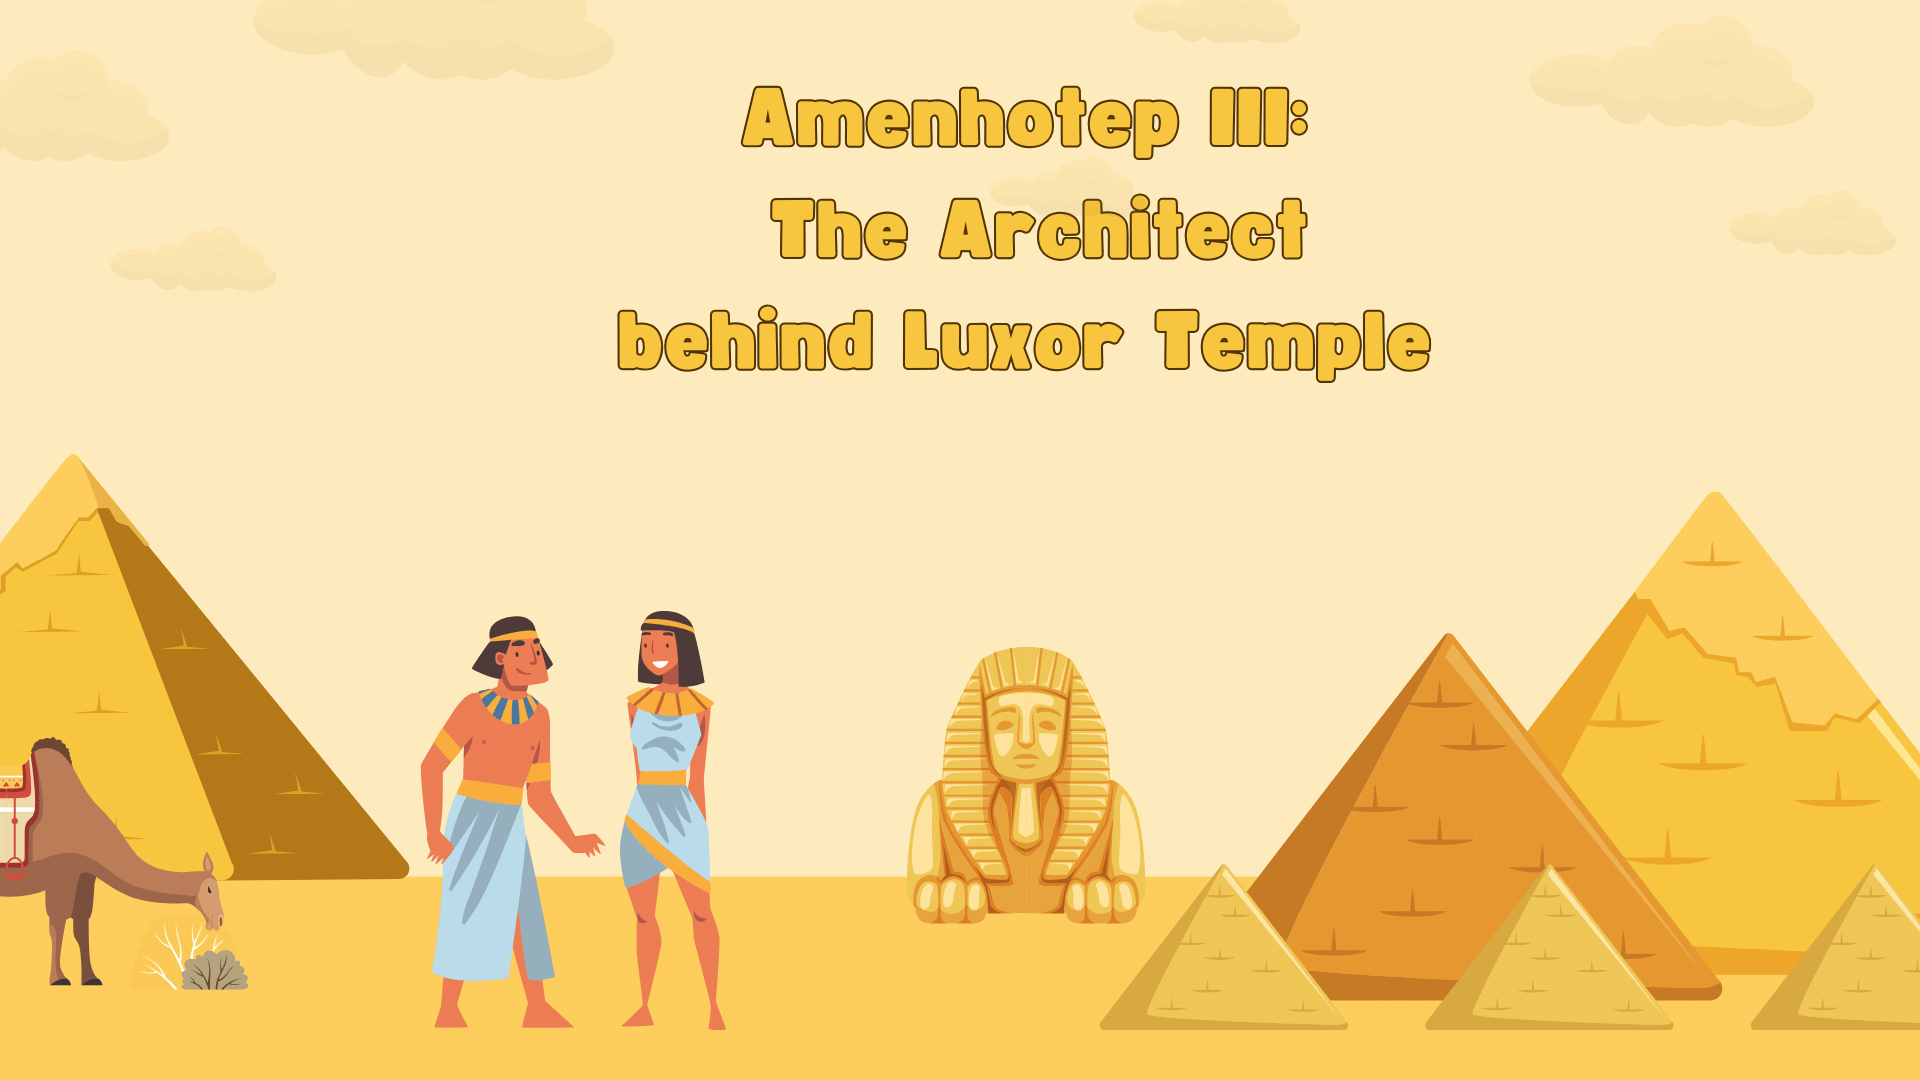 Amenhotep III: The Architect behind Luxor Temple